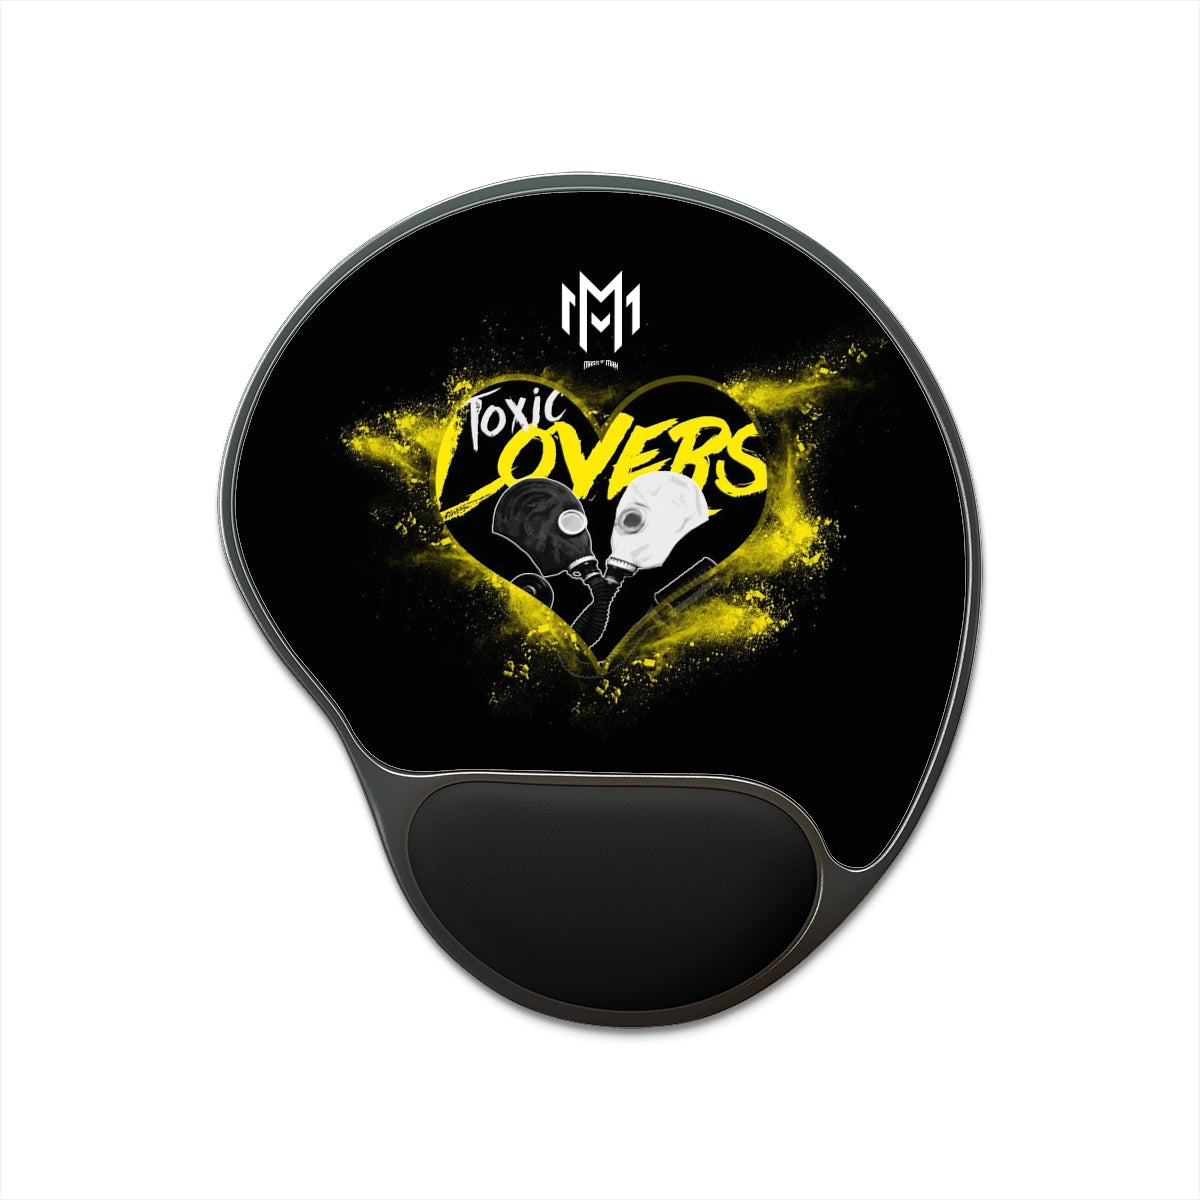 Toxic Lovers, Mass of Man Mouse Pad With Wrist Rest